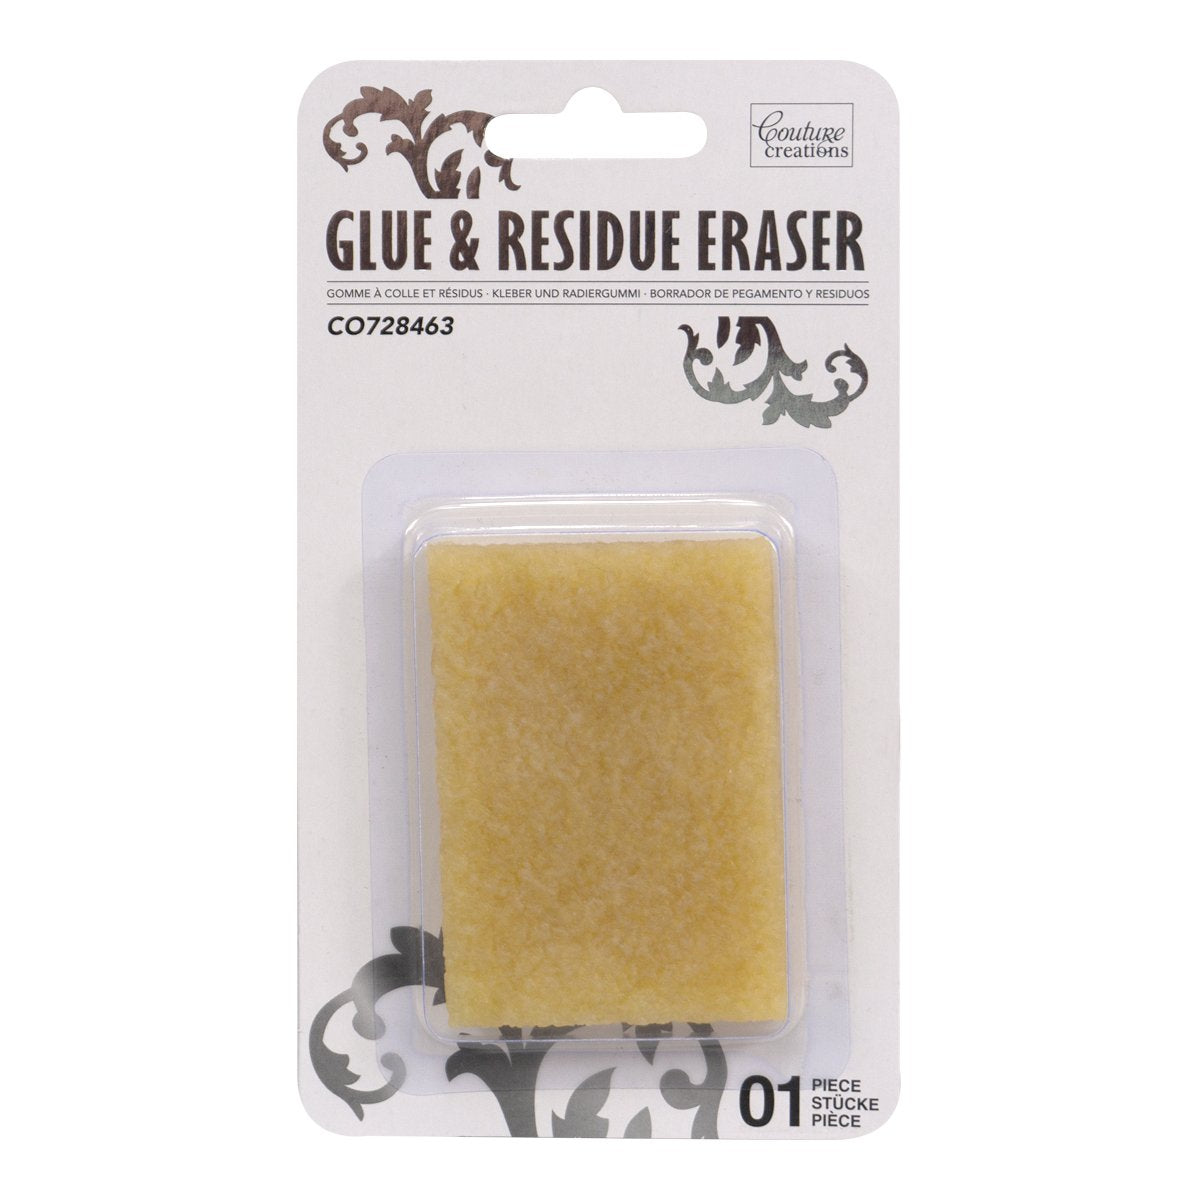 Glue and Residue Eraser